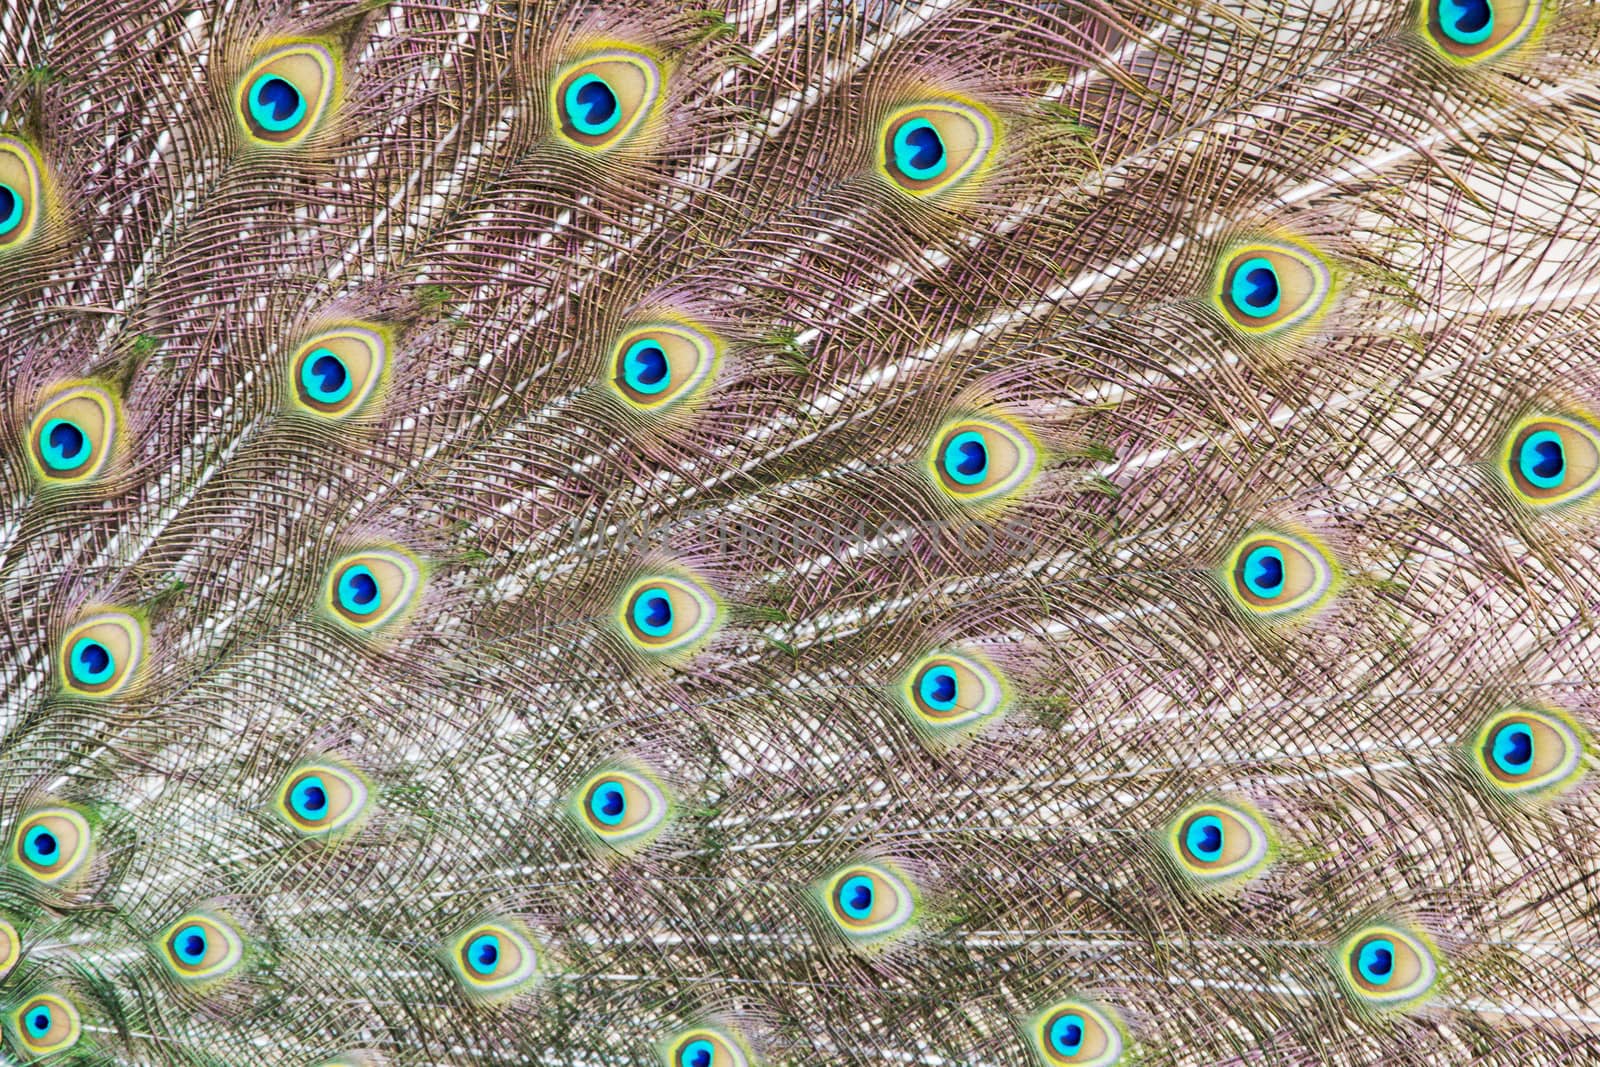 Closeup of a peacock tail with its colourful feathers fanned out.